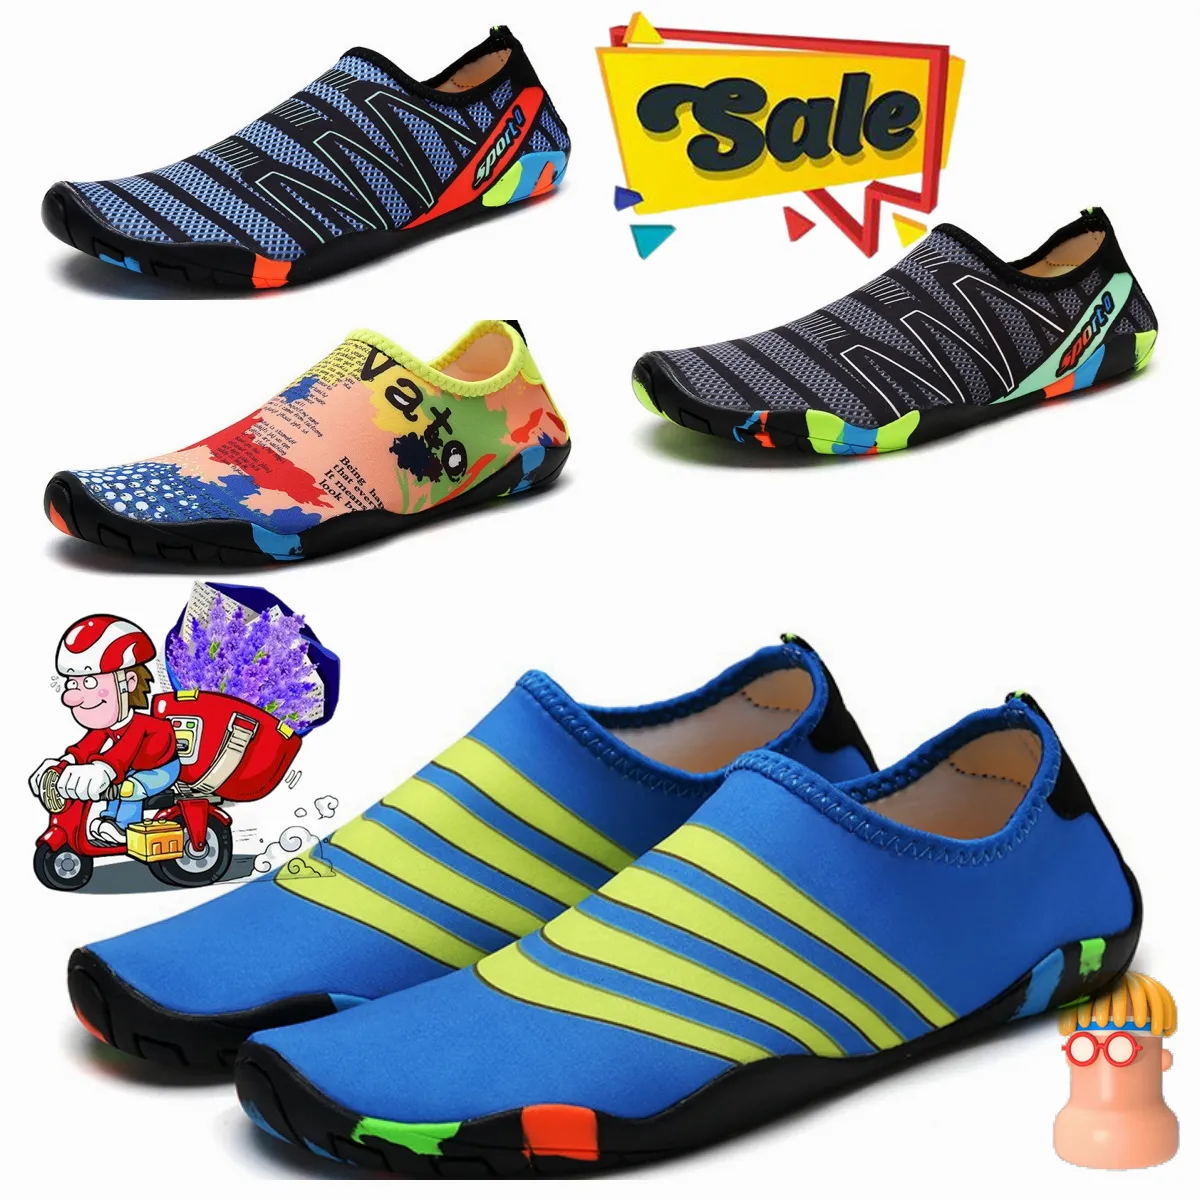 Summer Retro Fashion High Quality Cartoon Pattern Casual Slippers Outdoor Sports Soft Sole Men's Women's Sandals Socks Shoes